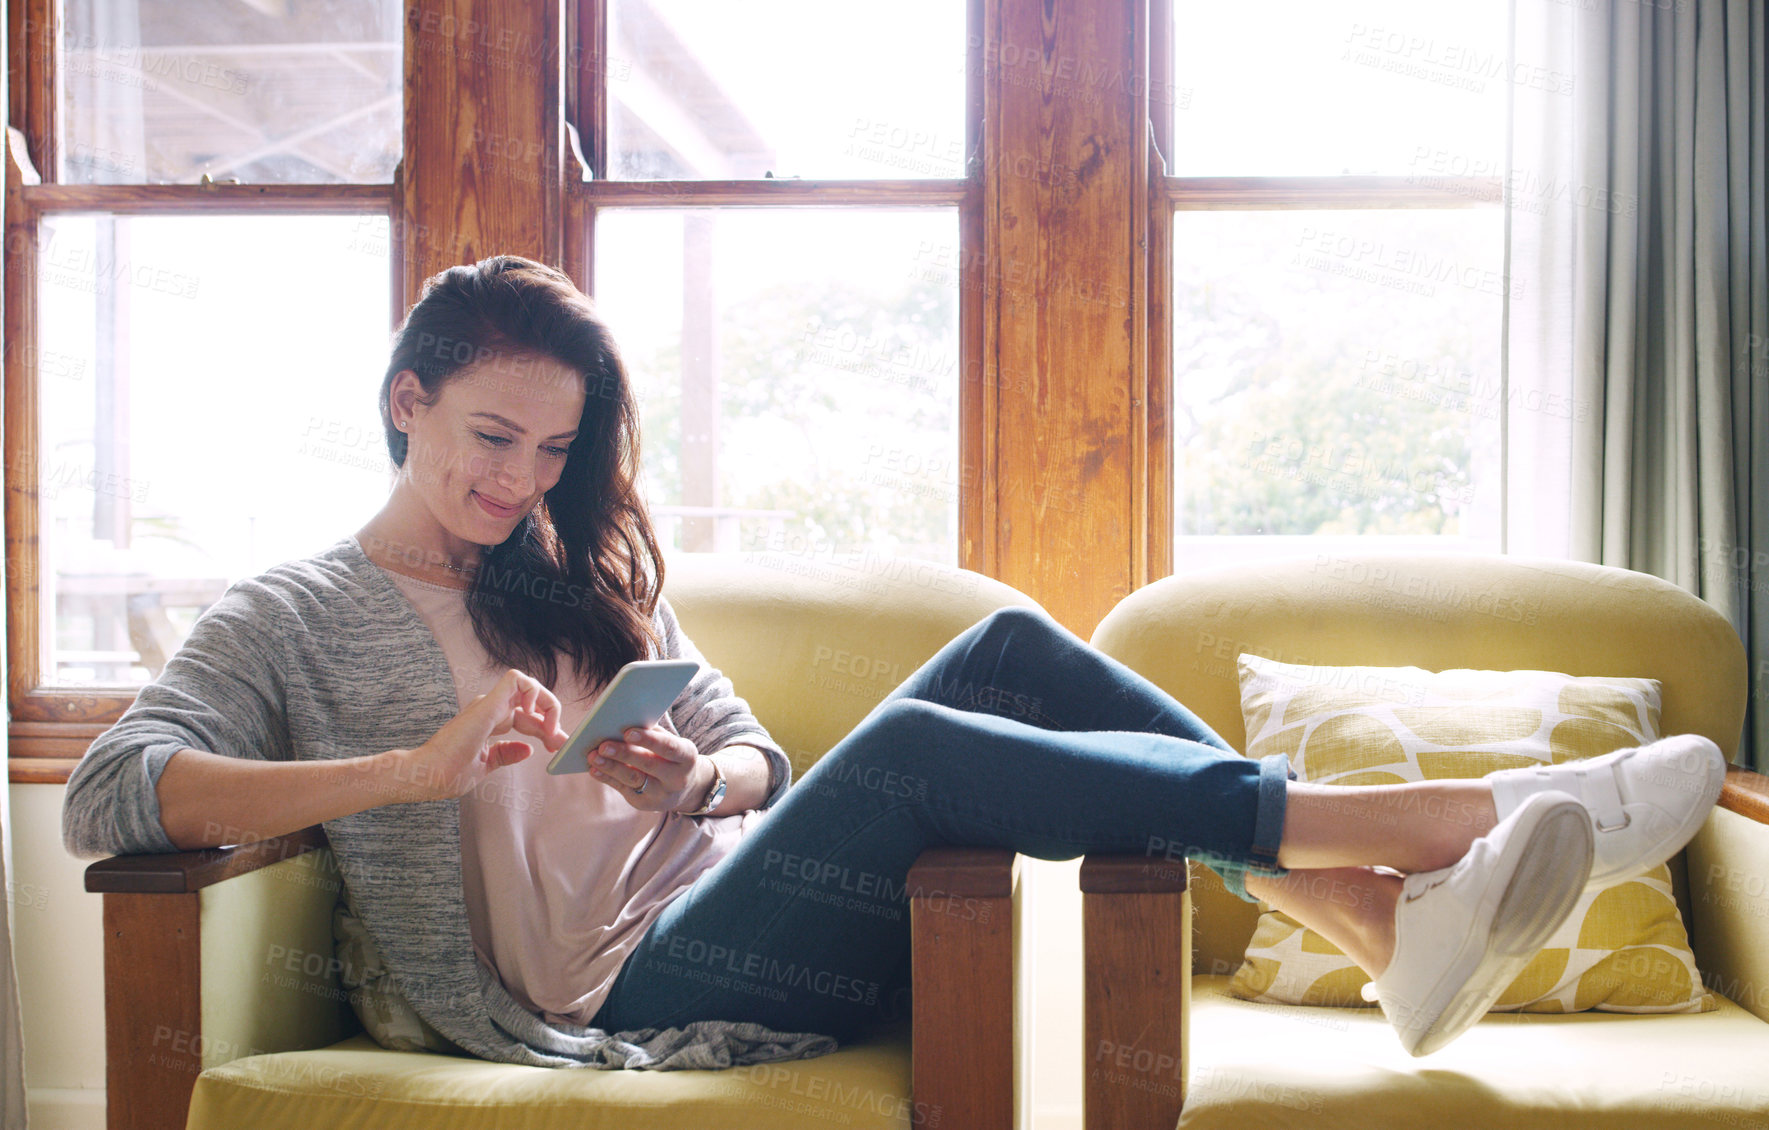 Buy stock photo Full length shot of an attractive young woman using a smartphone while relaxing on her couch at home